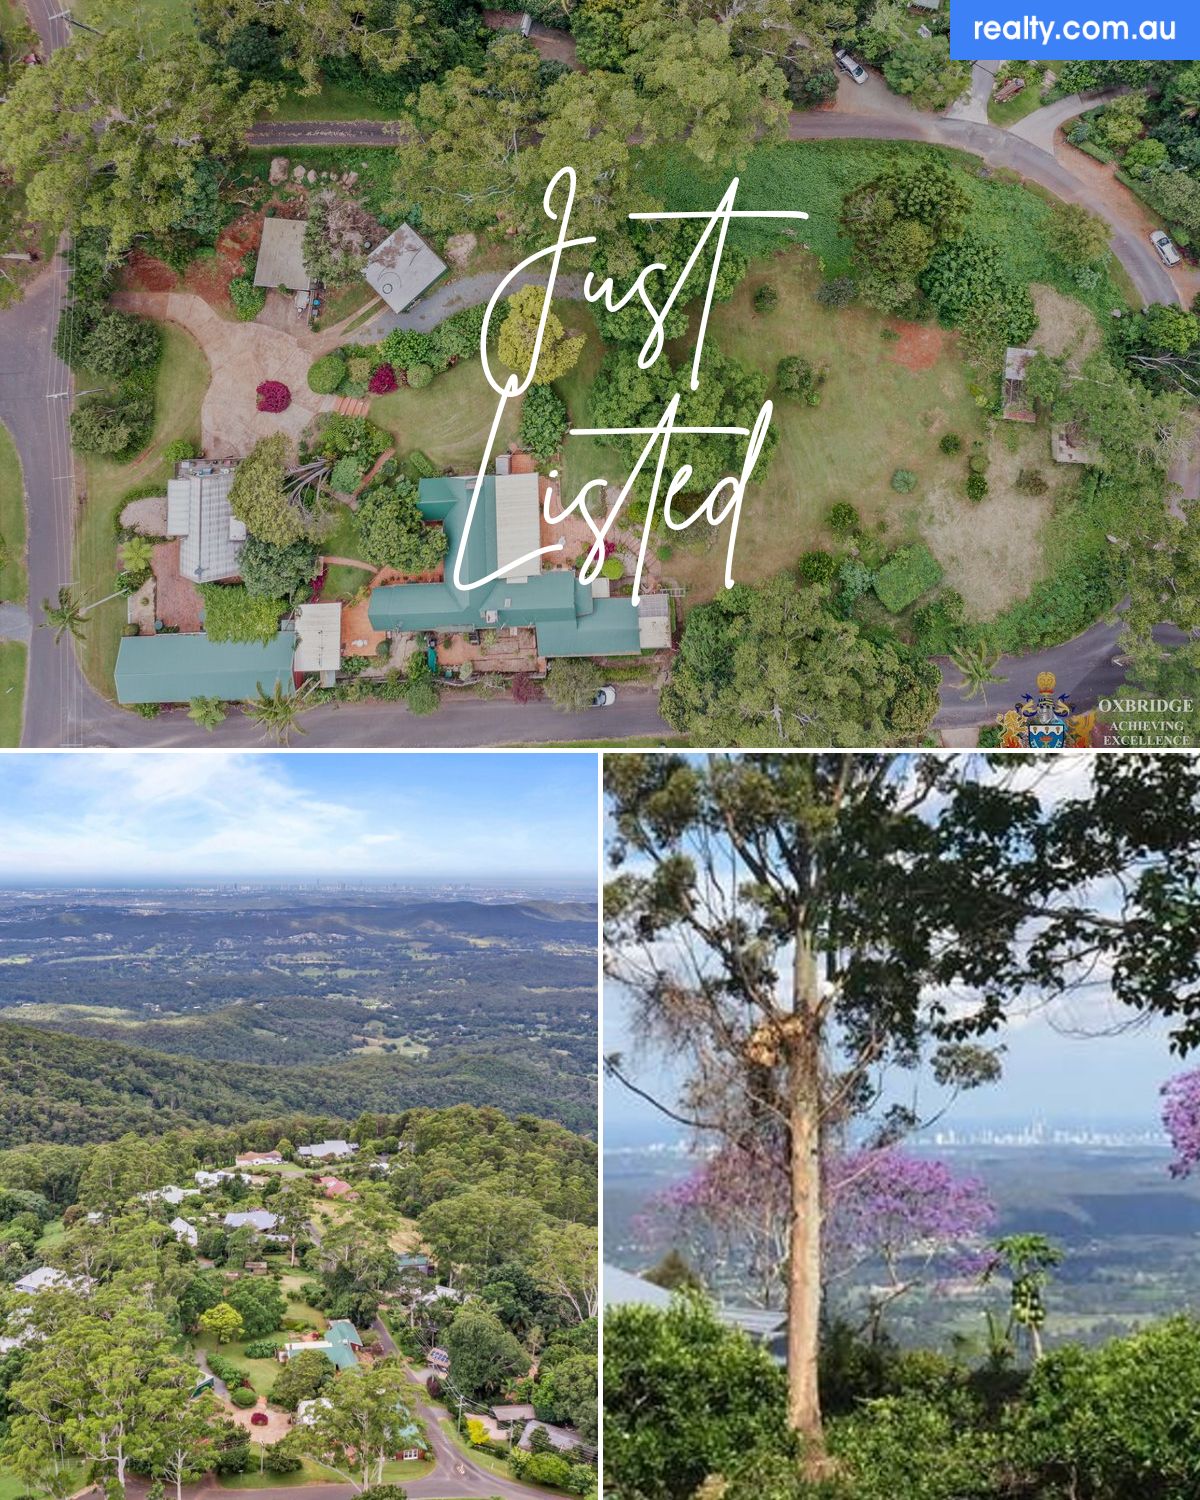 4-20 Witherby Crescent, Tamborine Mountain, QLD 4272 | Realty.com.au